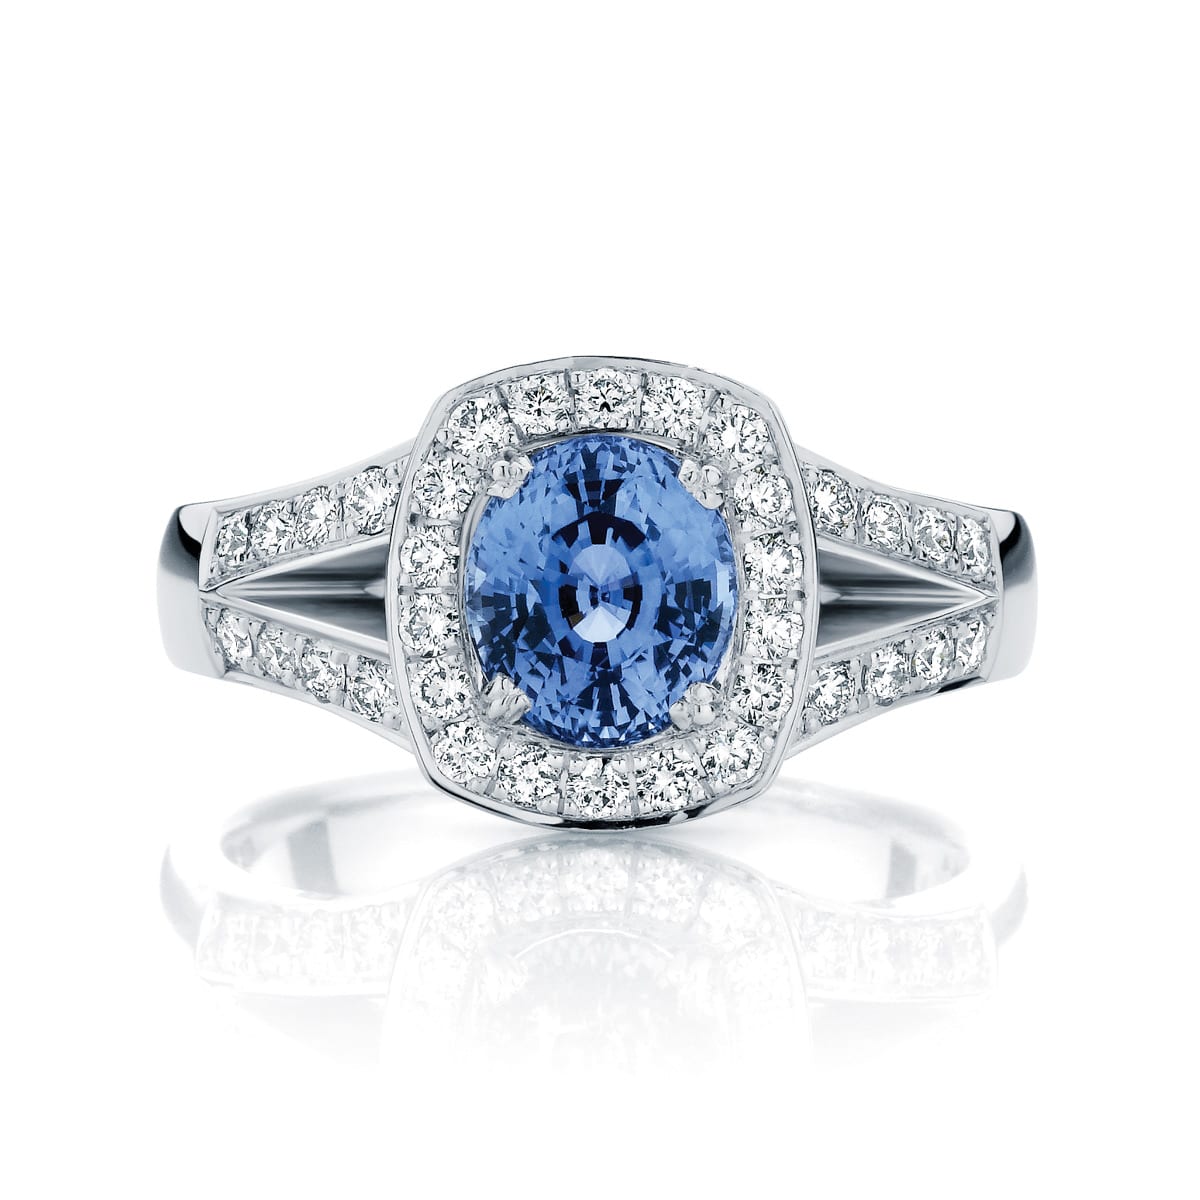 Sapphire Engagement Rings | Made in Australia